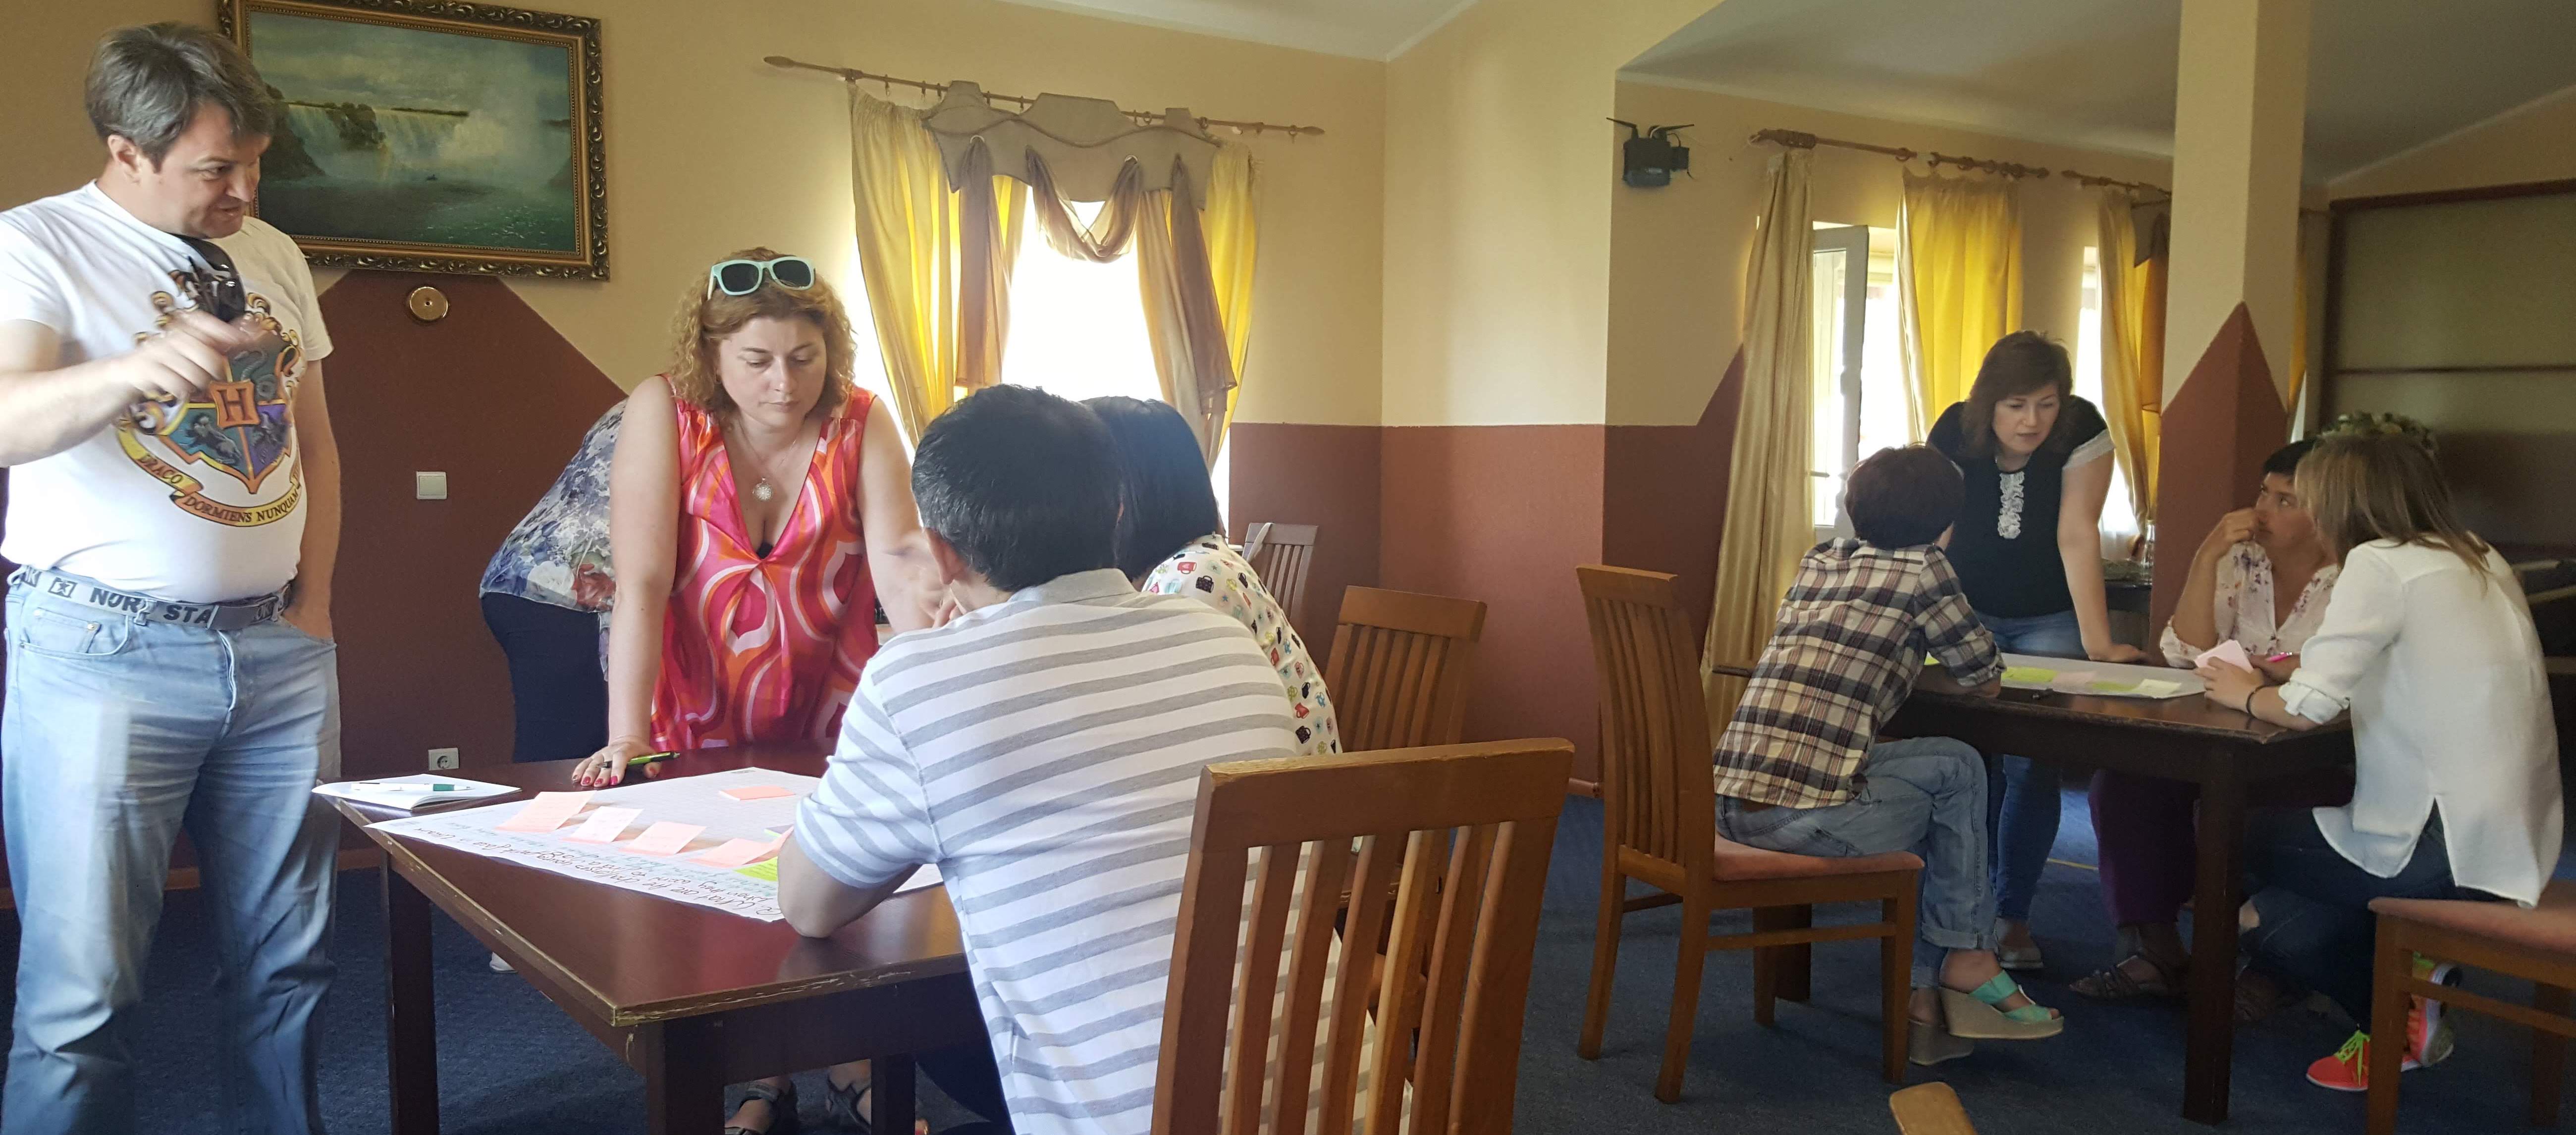 ENPower Workshop – learning about employment and entrepreneurial challenges faced by Ukrainian young people